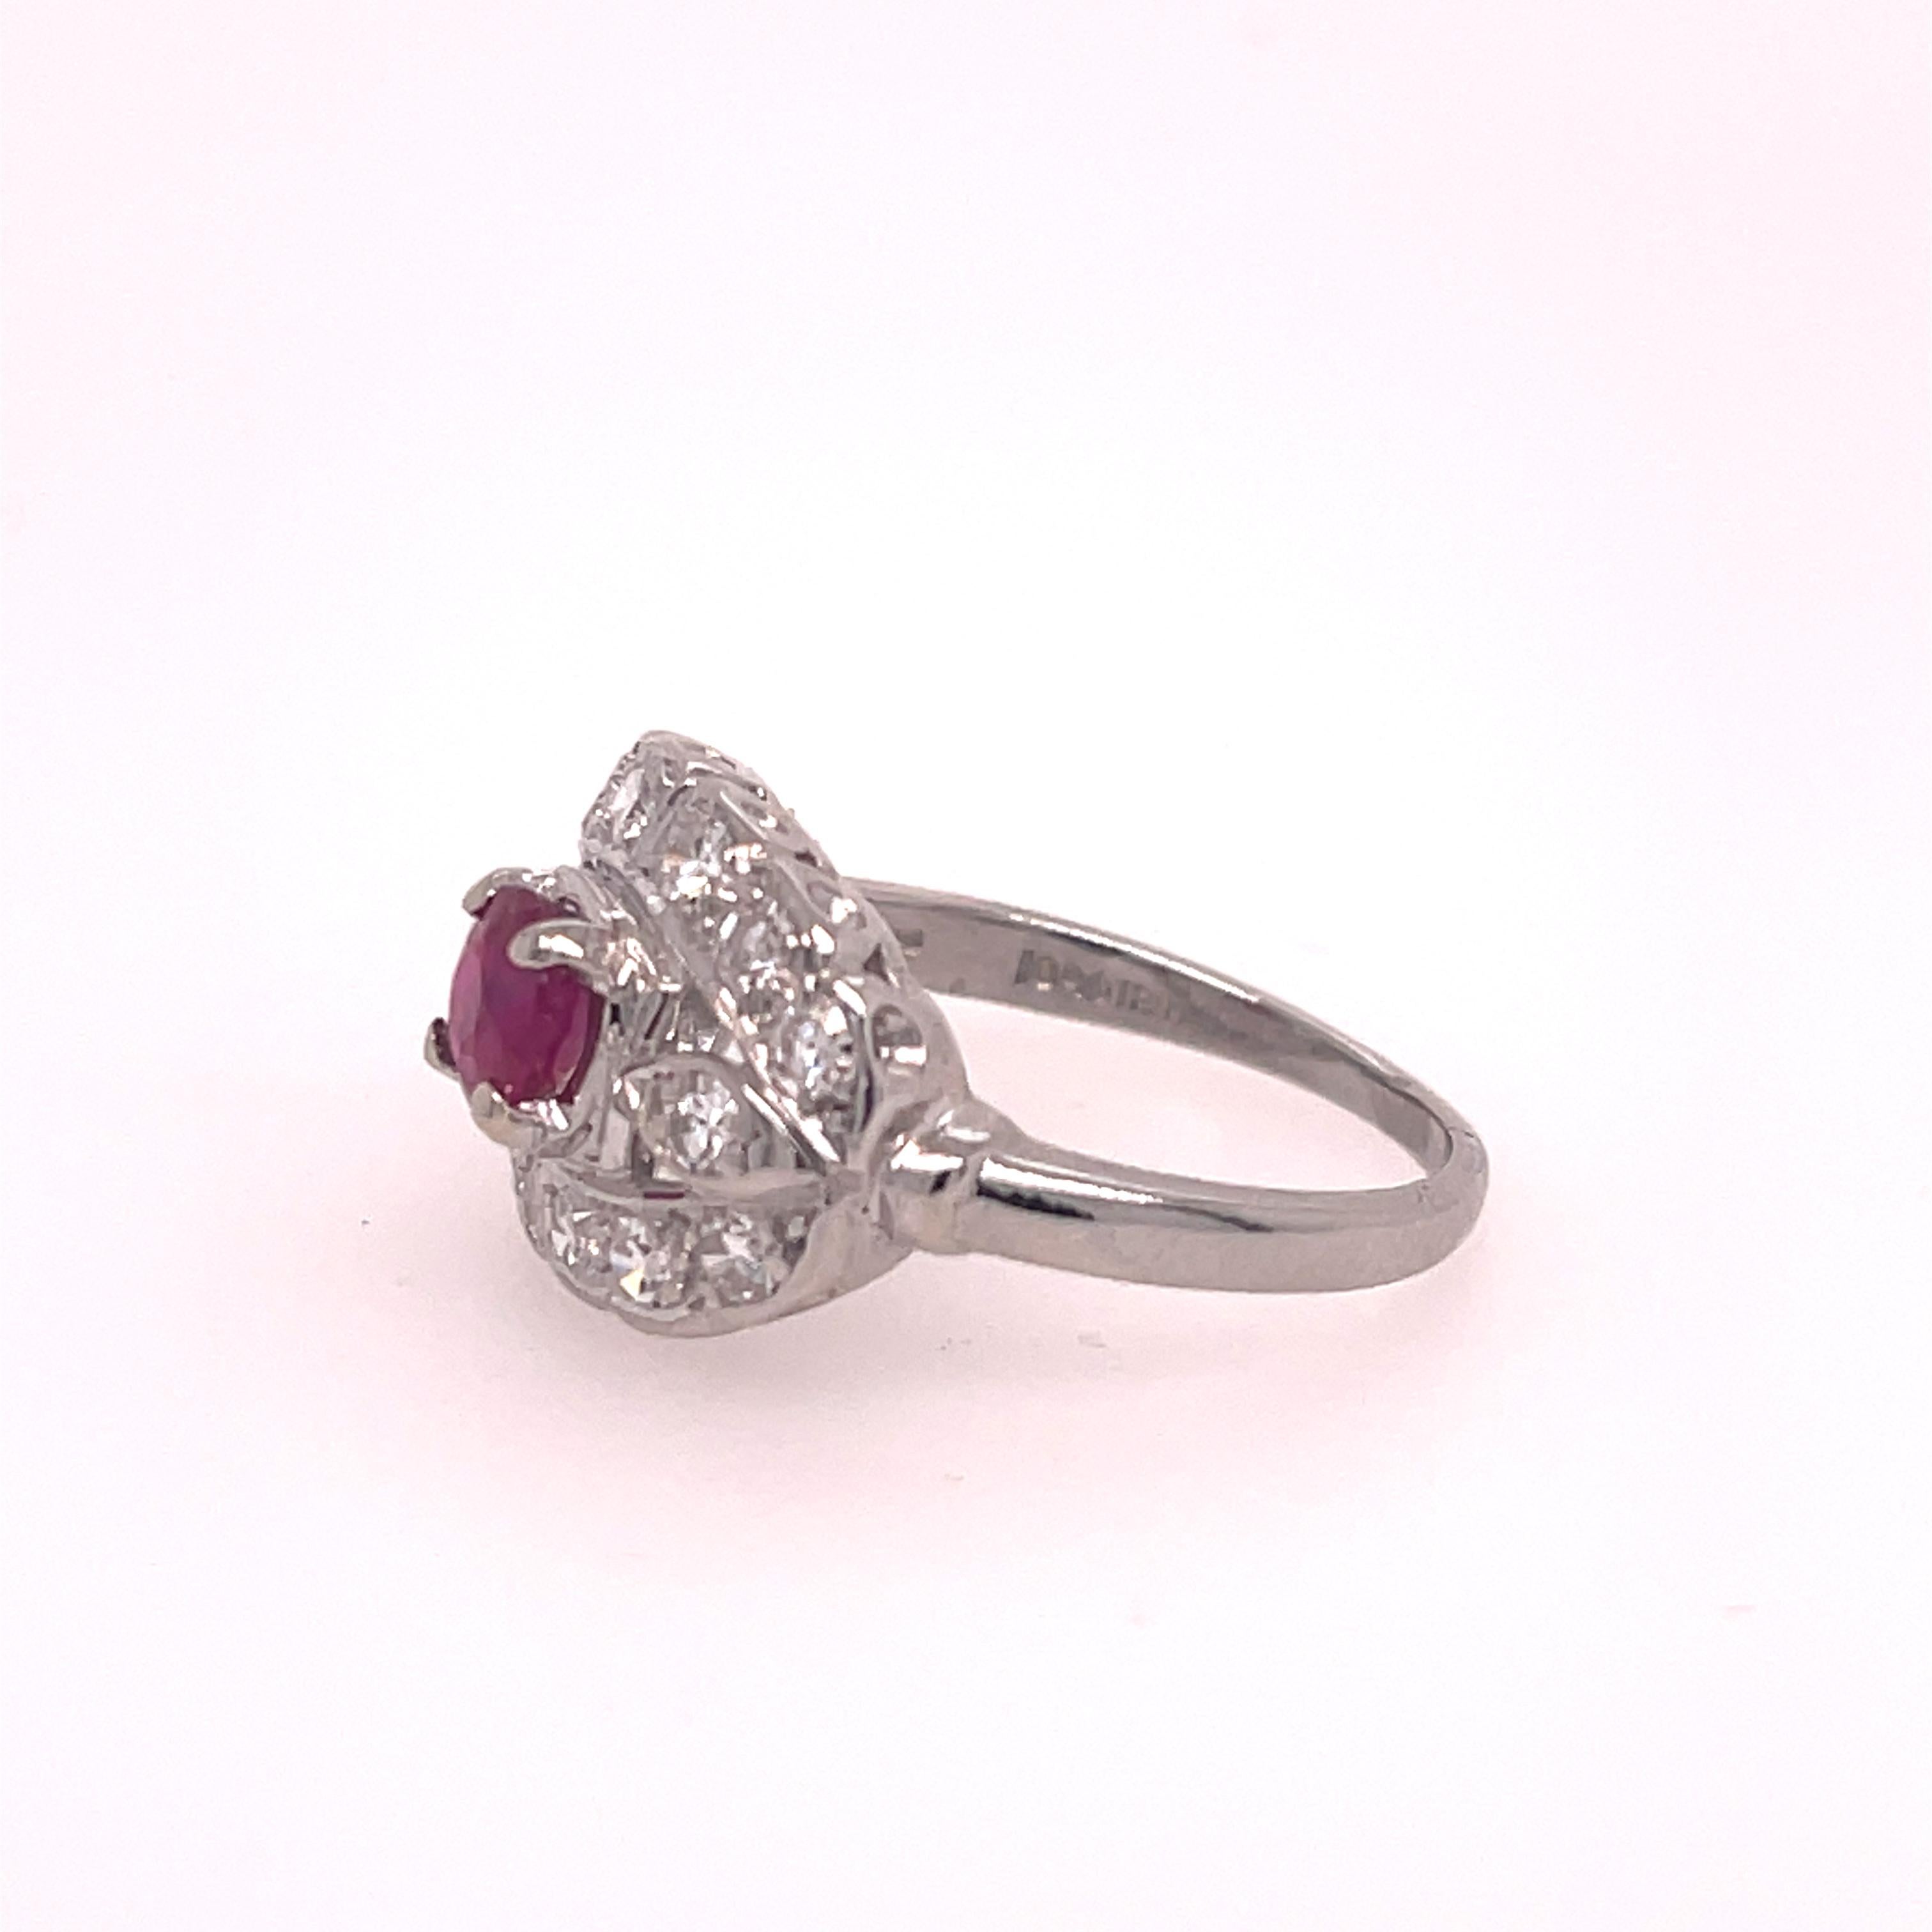 Ladies Diamond and Ruby Art Deco Ring in Platinum.  The ring features a .61 natural round full cut ruby, AA quality.  Complimenting the center stone are 14 single cut round diamonds, approximately 1/4 carat total weight, G-H in color and SI1 in